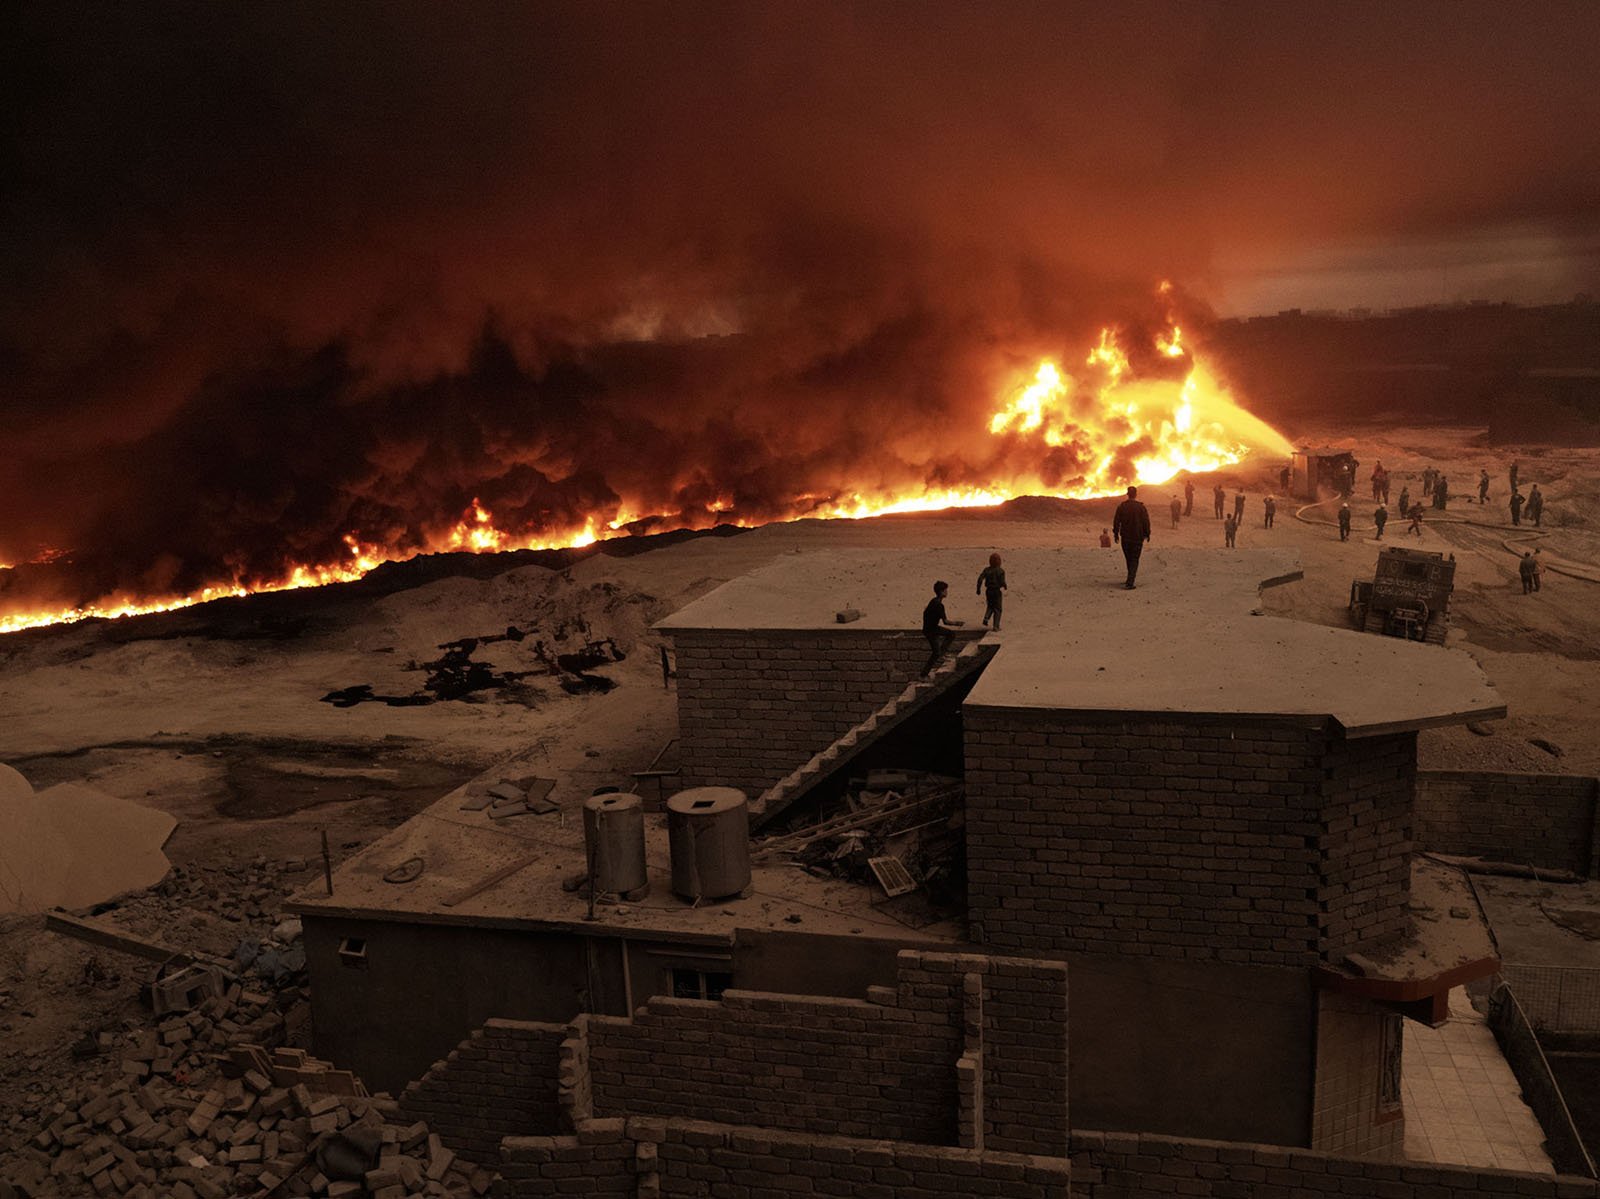 The Day the Sun Never Rose: Photos of Iraqs Burning Oil Wells by Joey L